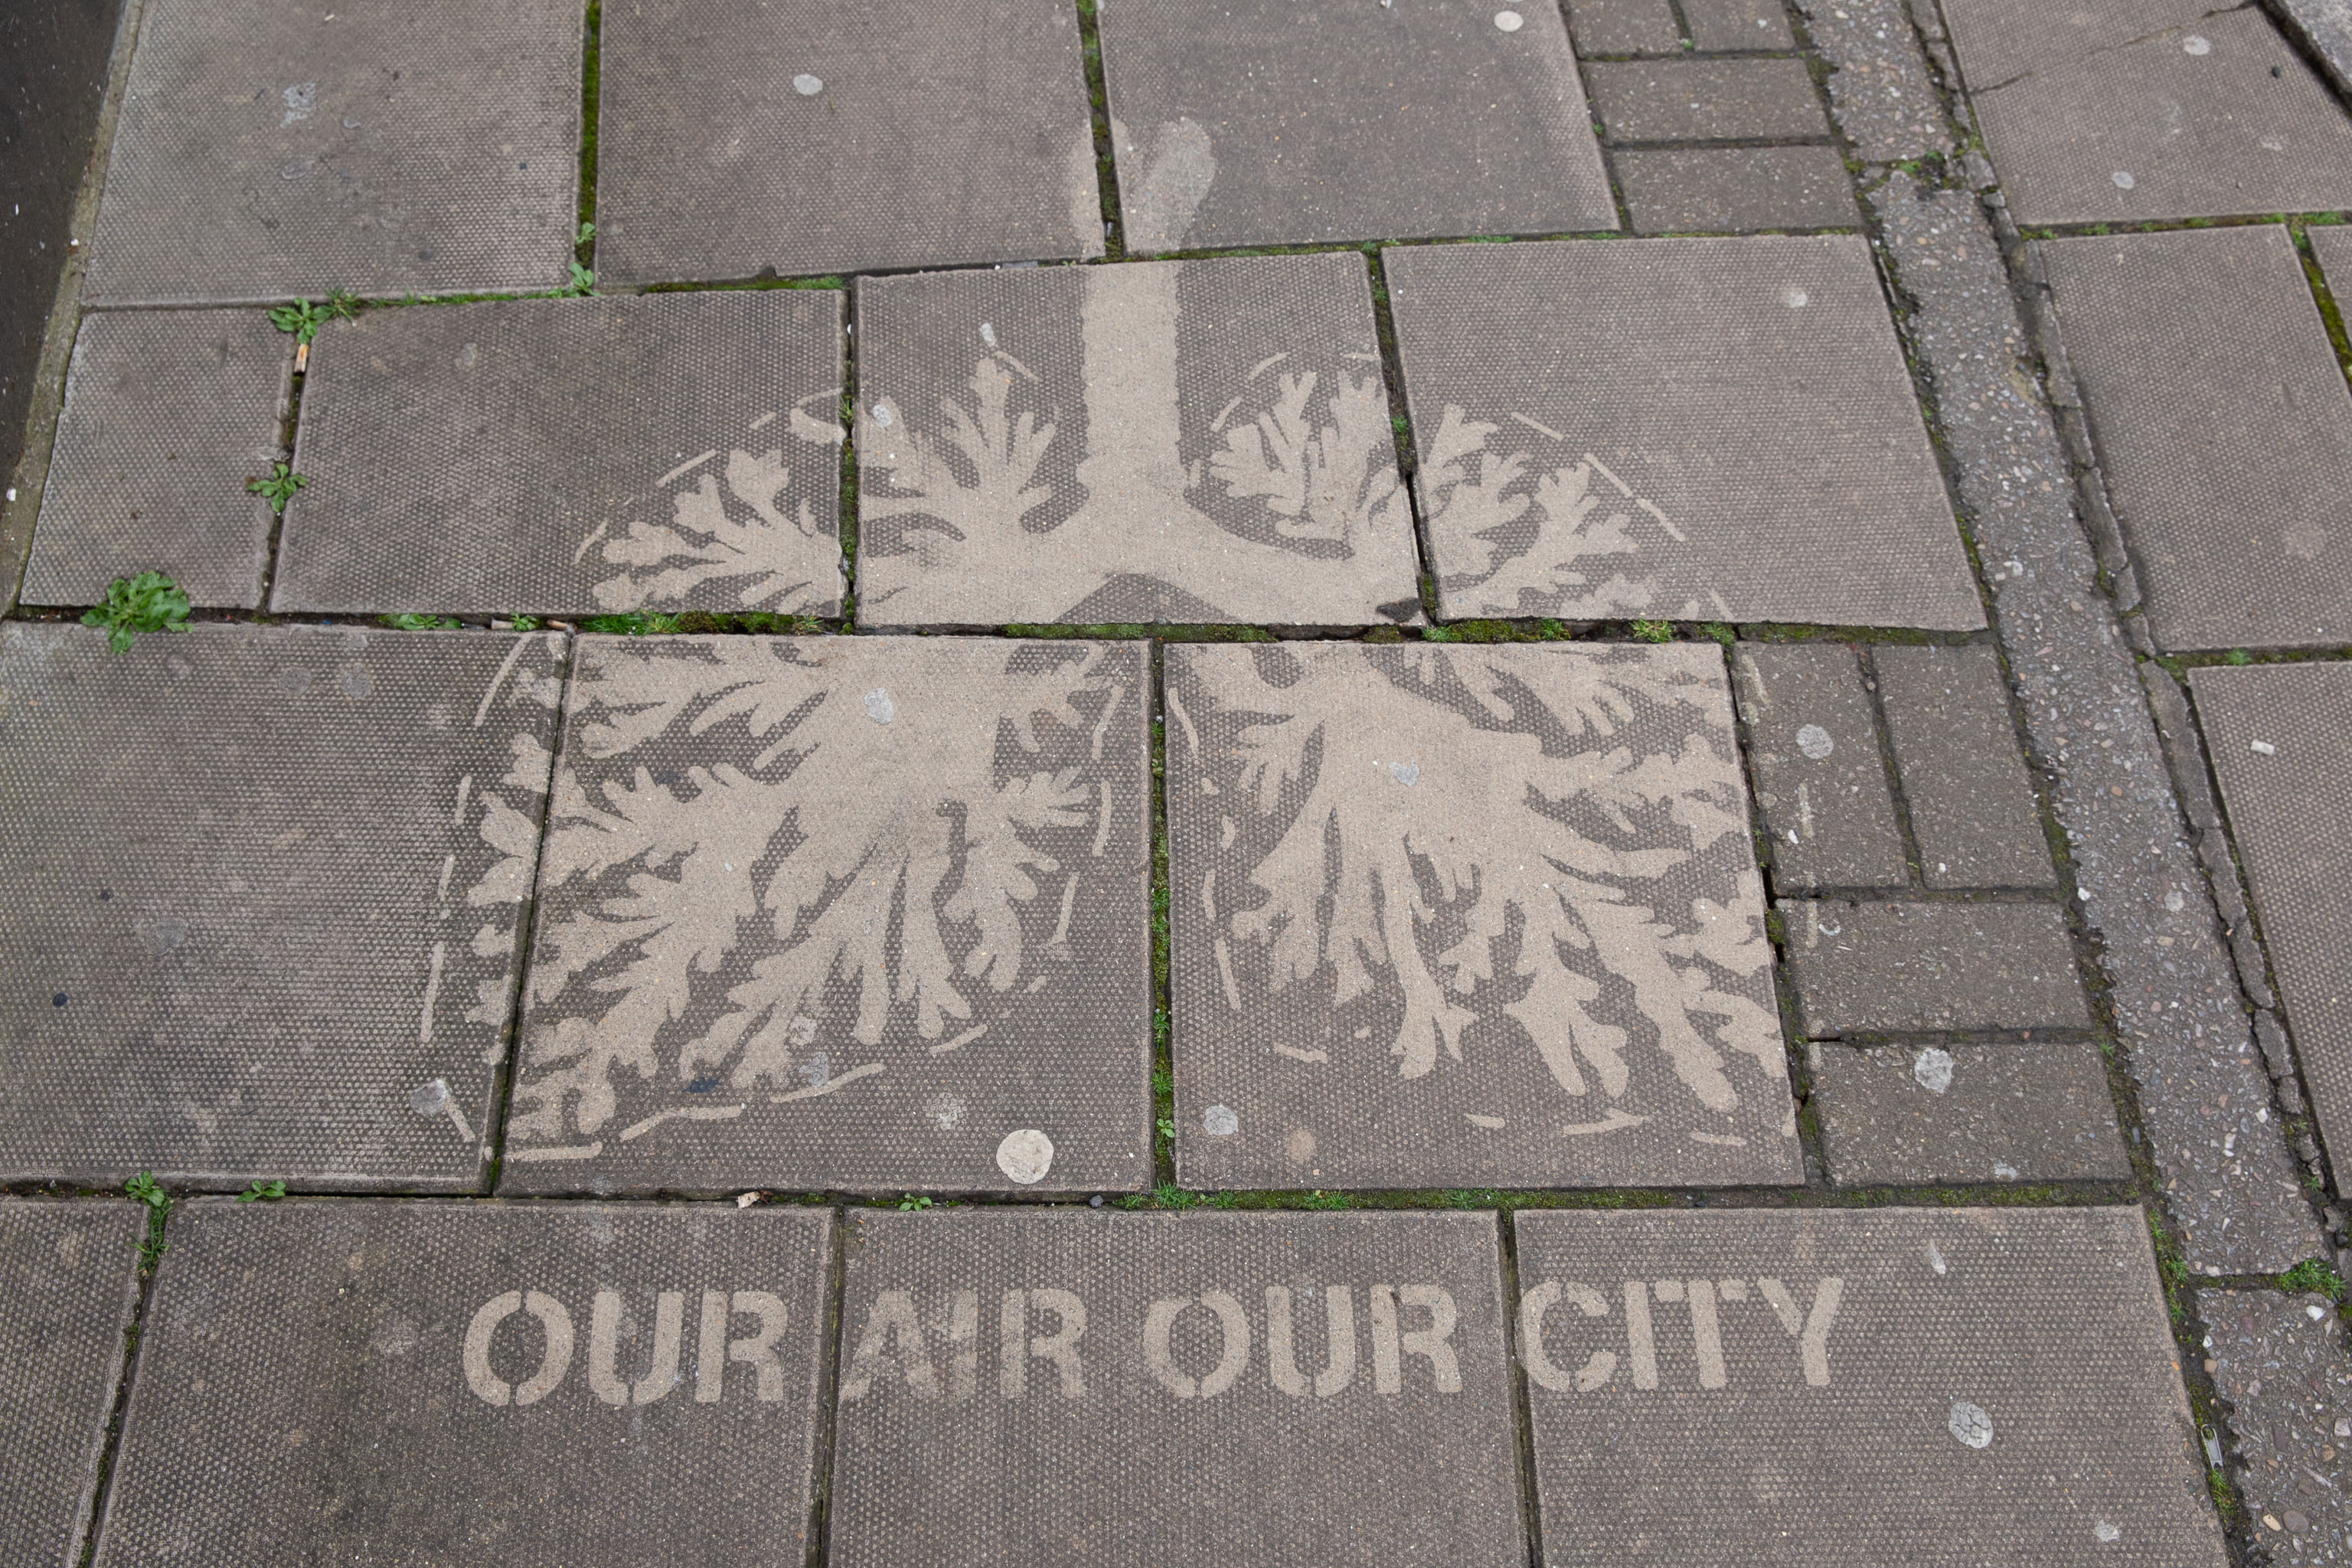 Our Air Our City
Clever: stencil out the pavement, then pressure-wash it, to make your point by highlighting the discolouration that's partly caused by airborne par...